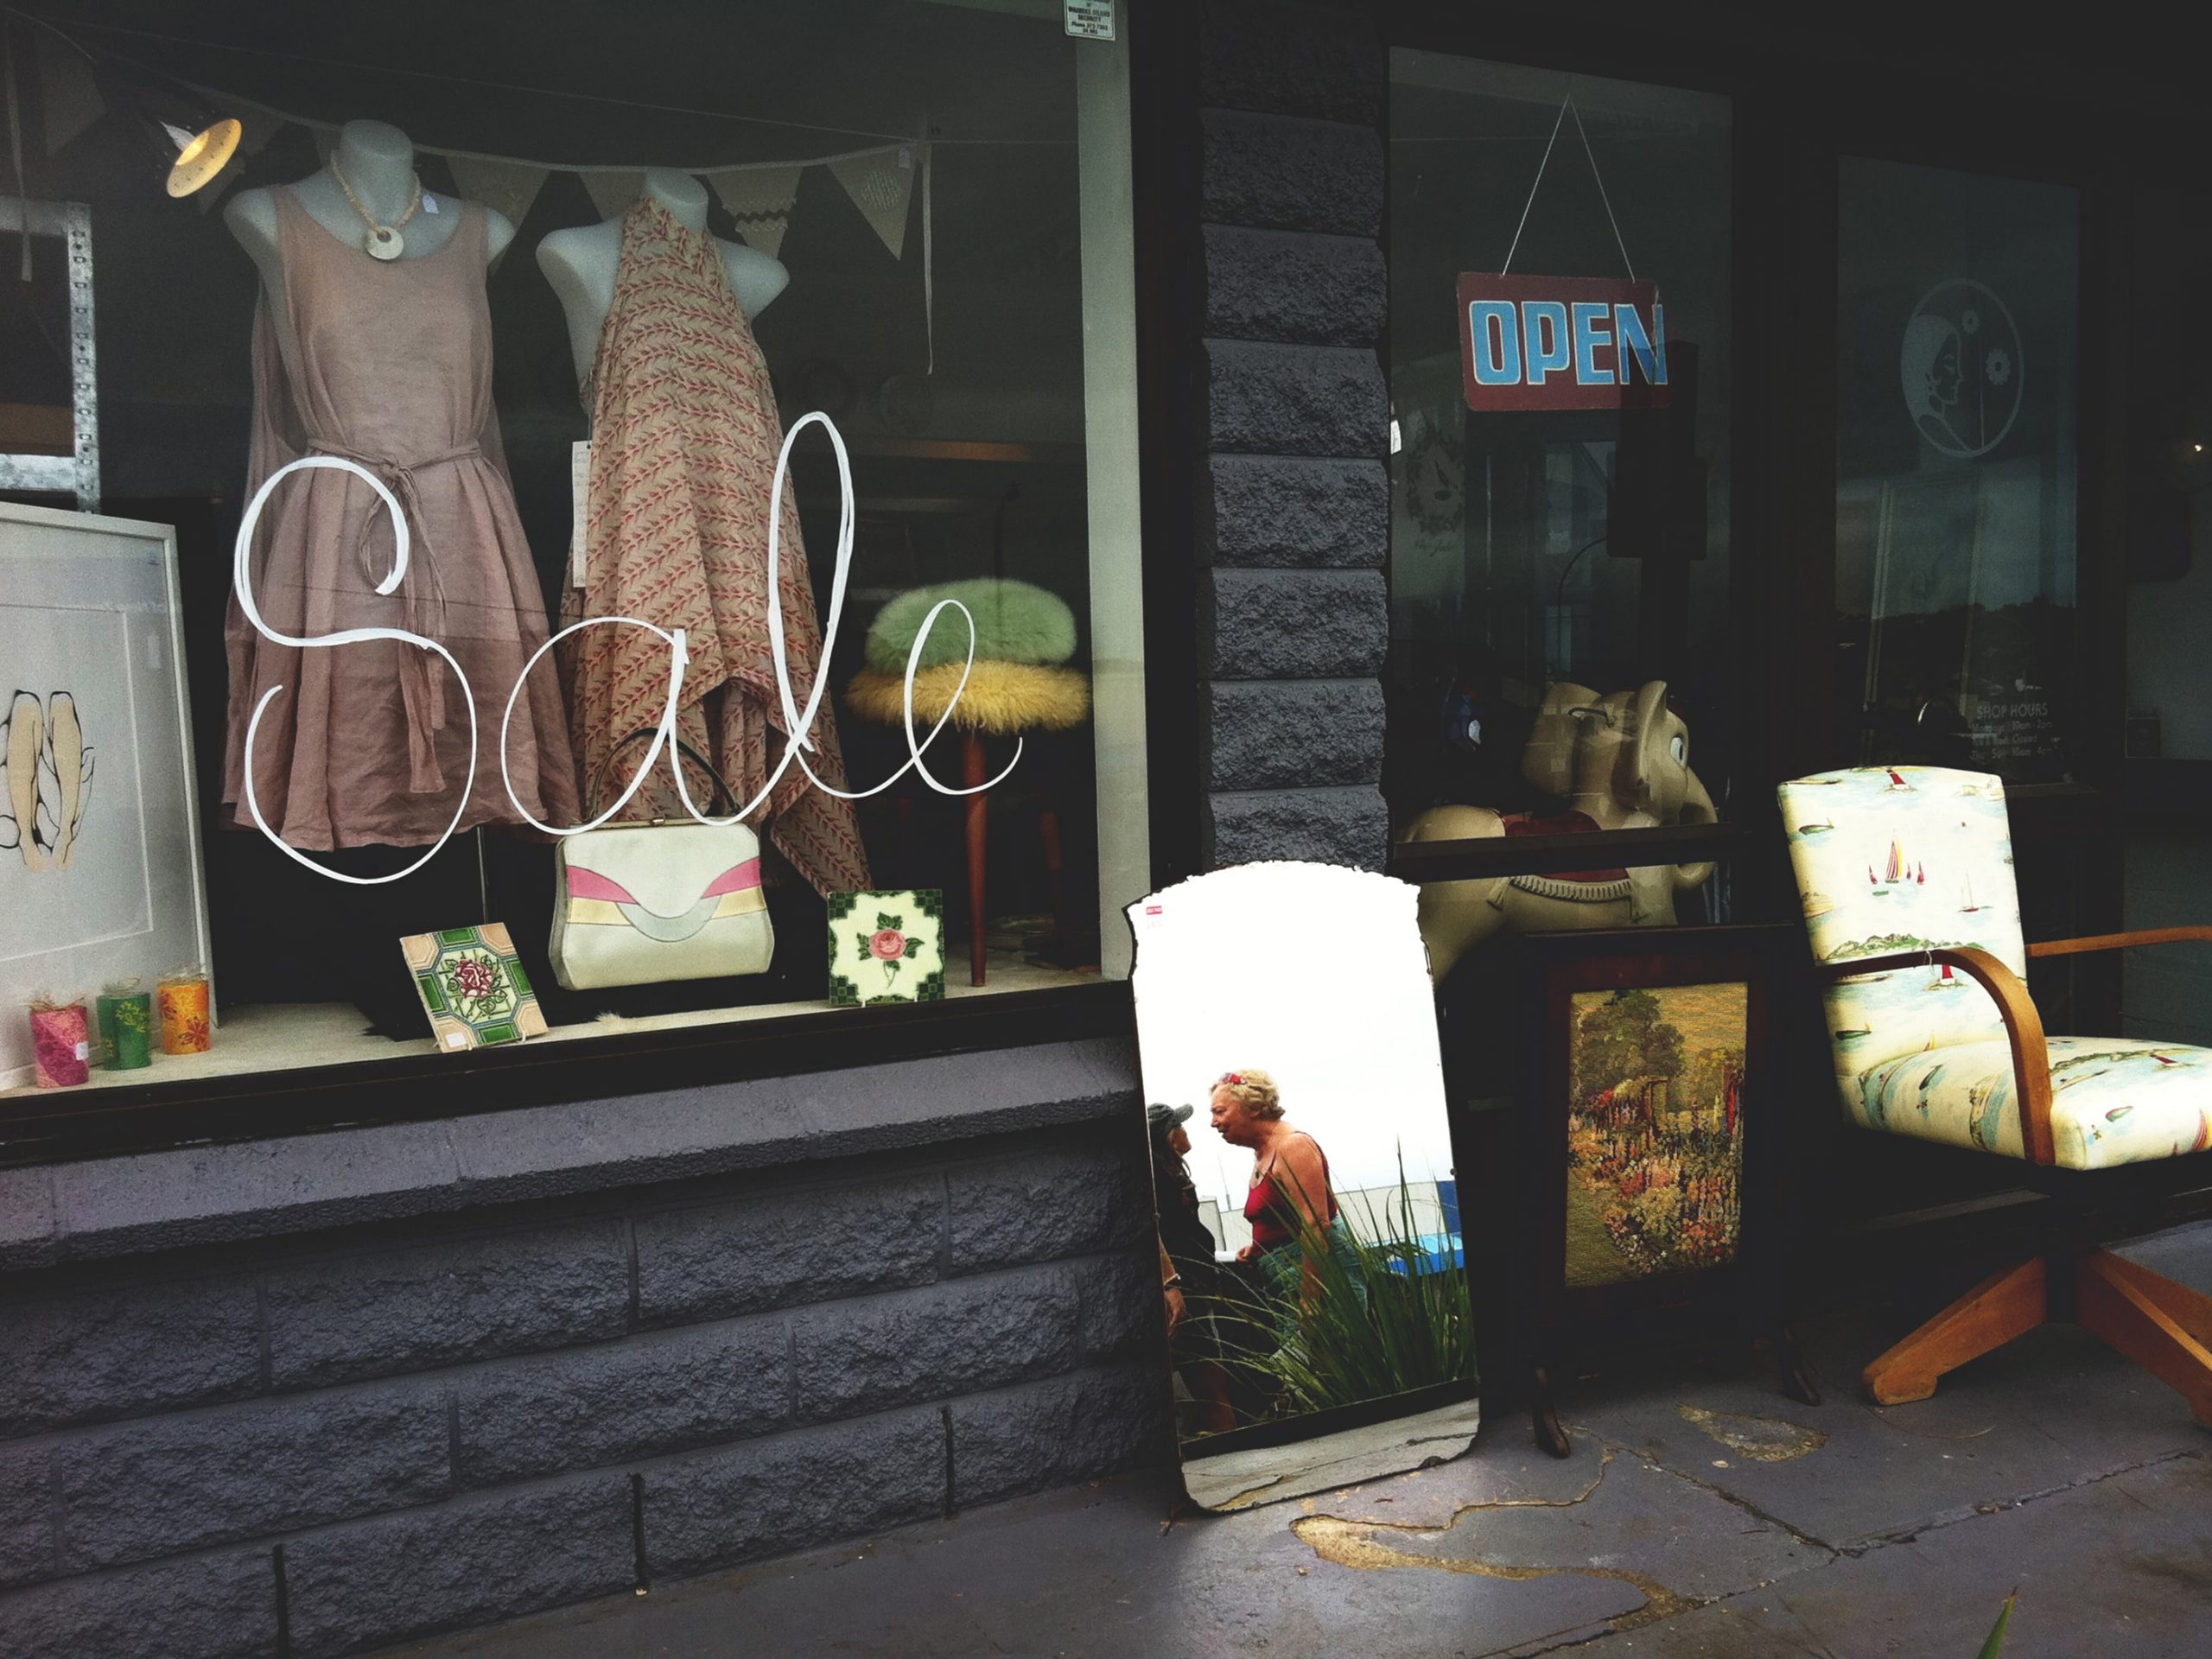 façade of a local business selling women’s apparel; currently offering items on sale and looking for the best payment methods for small business